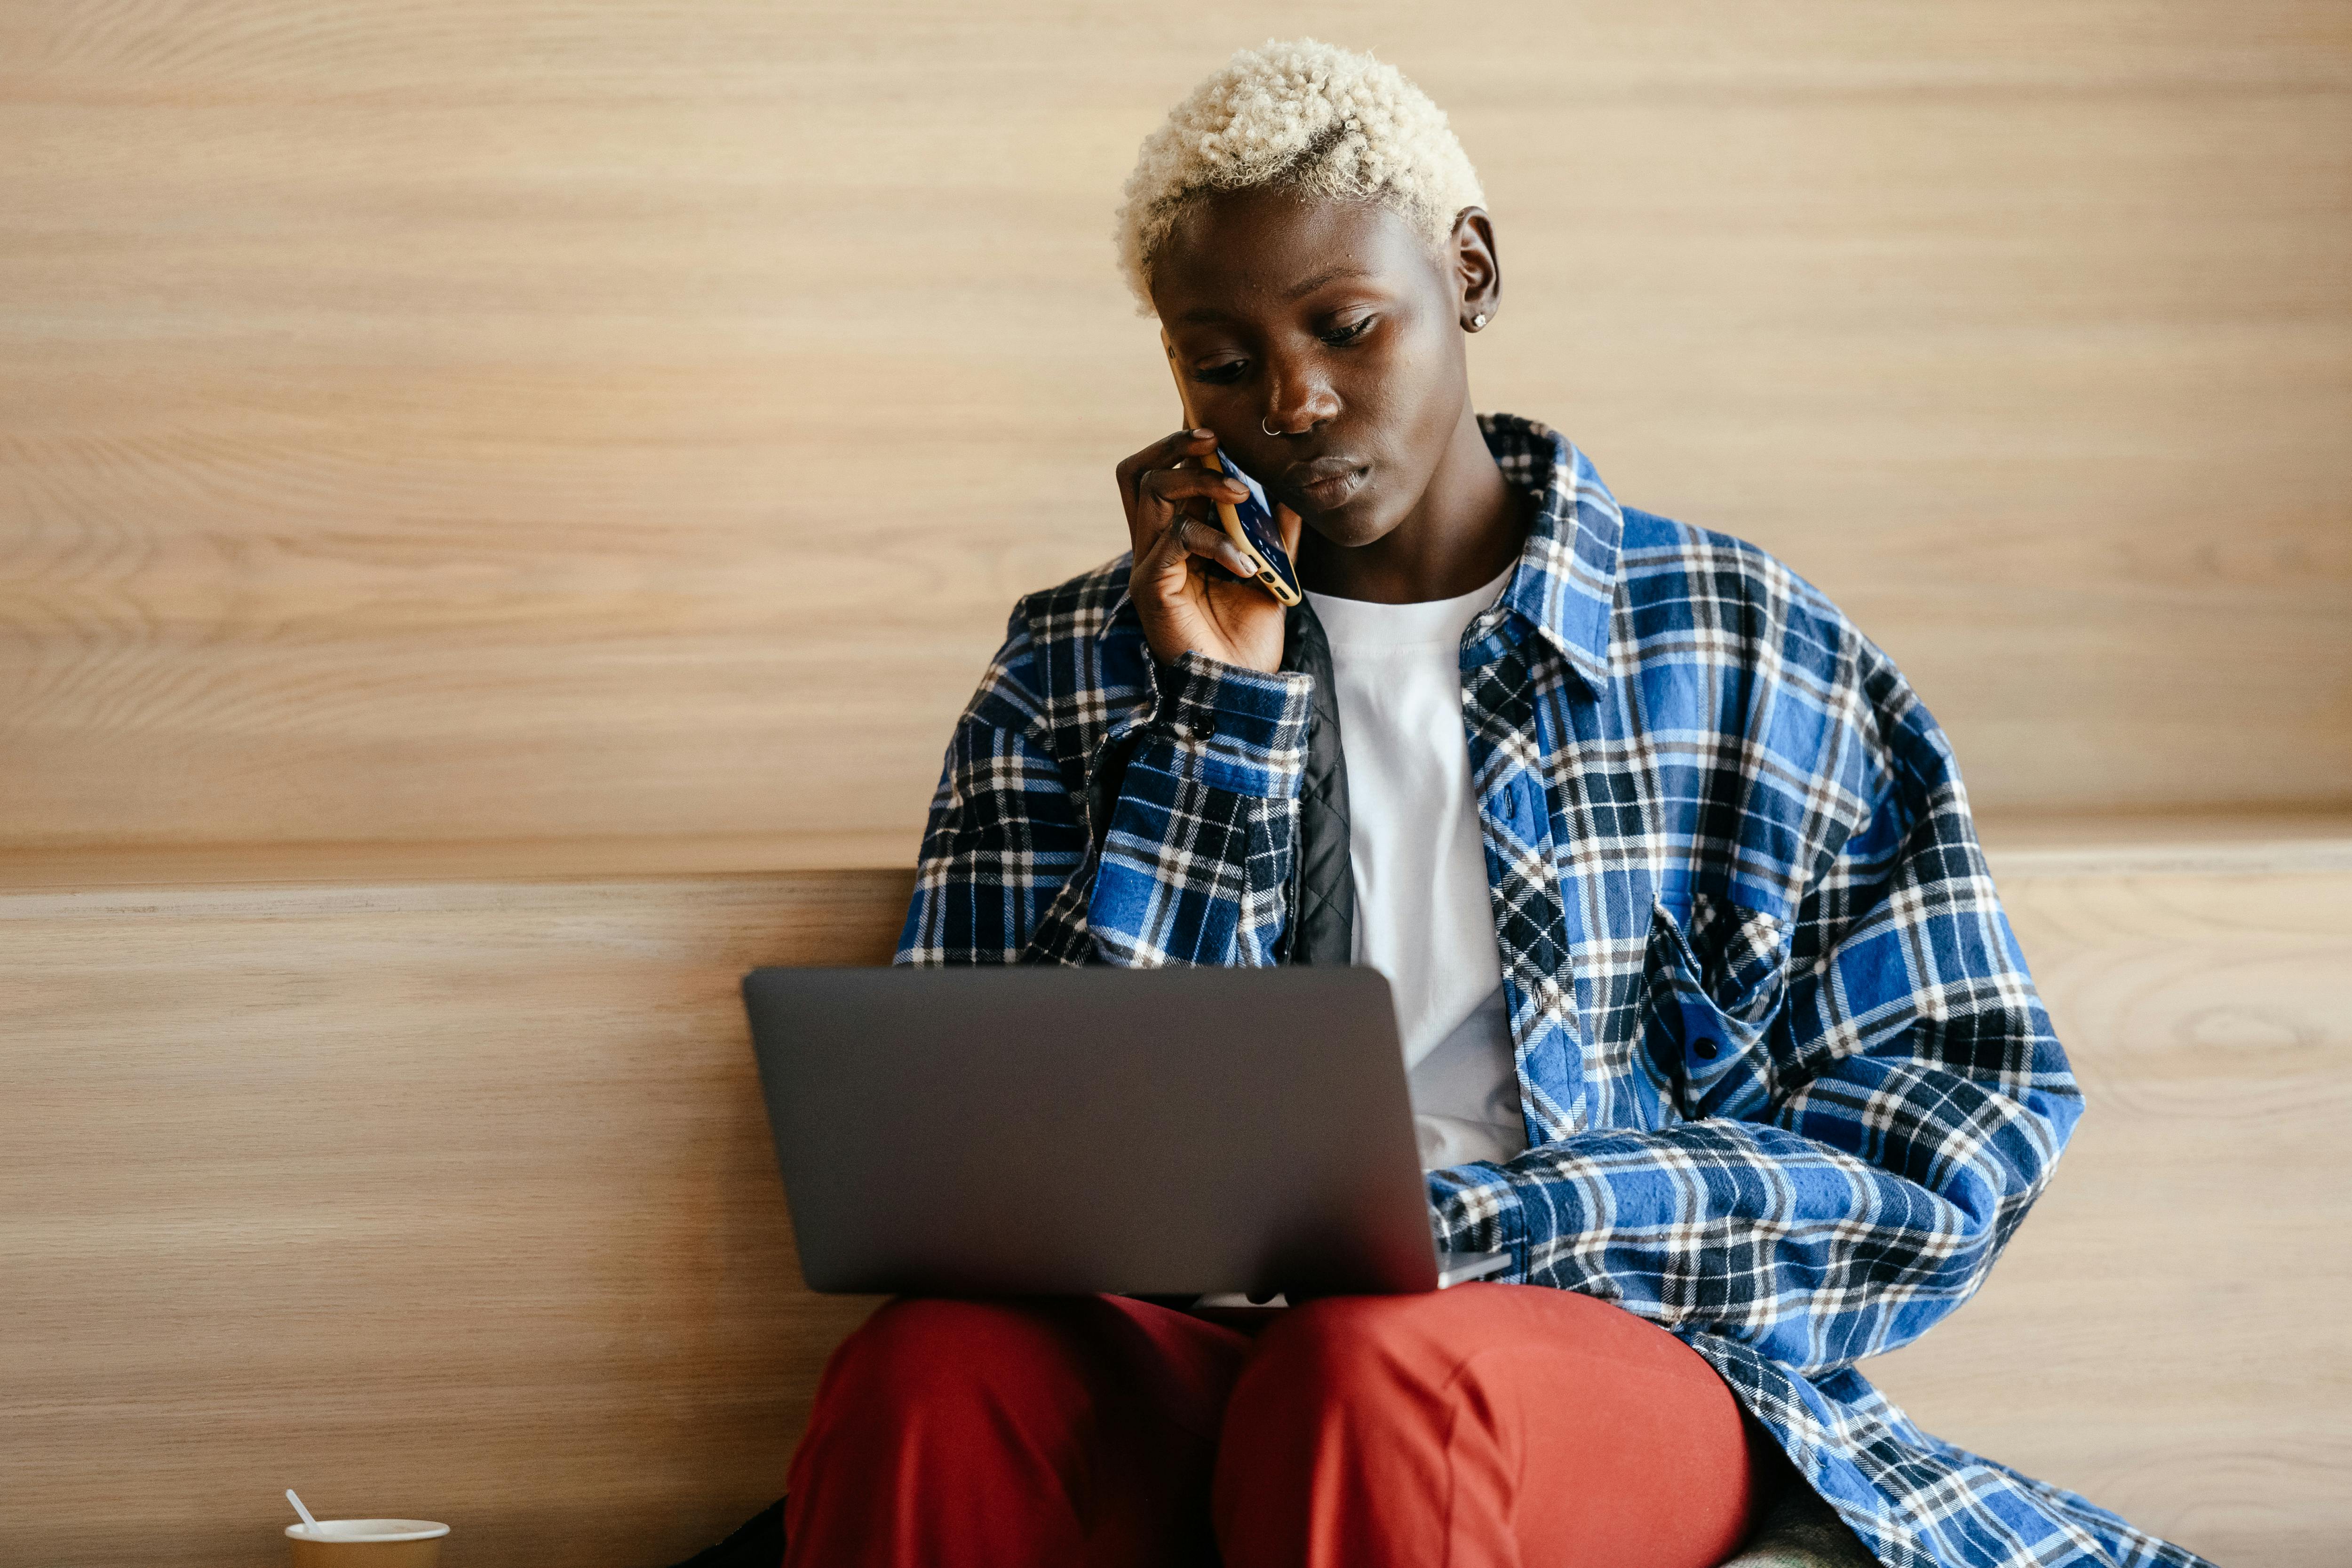 black woman talking on smartphone while surfing internet on laptop